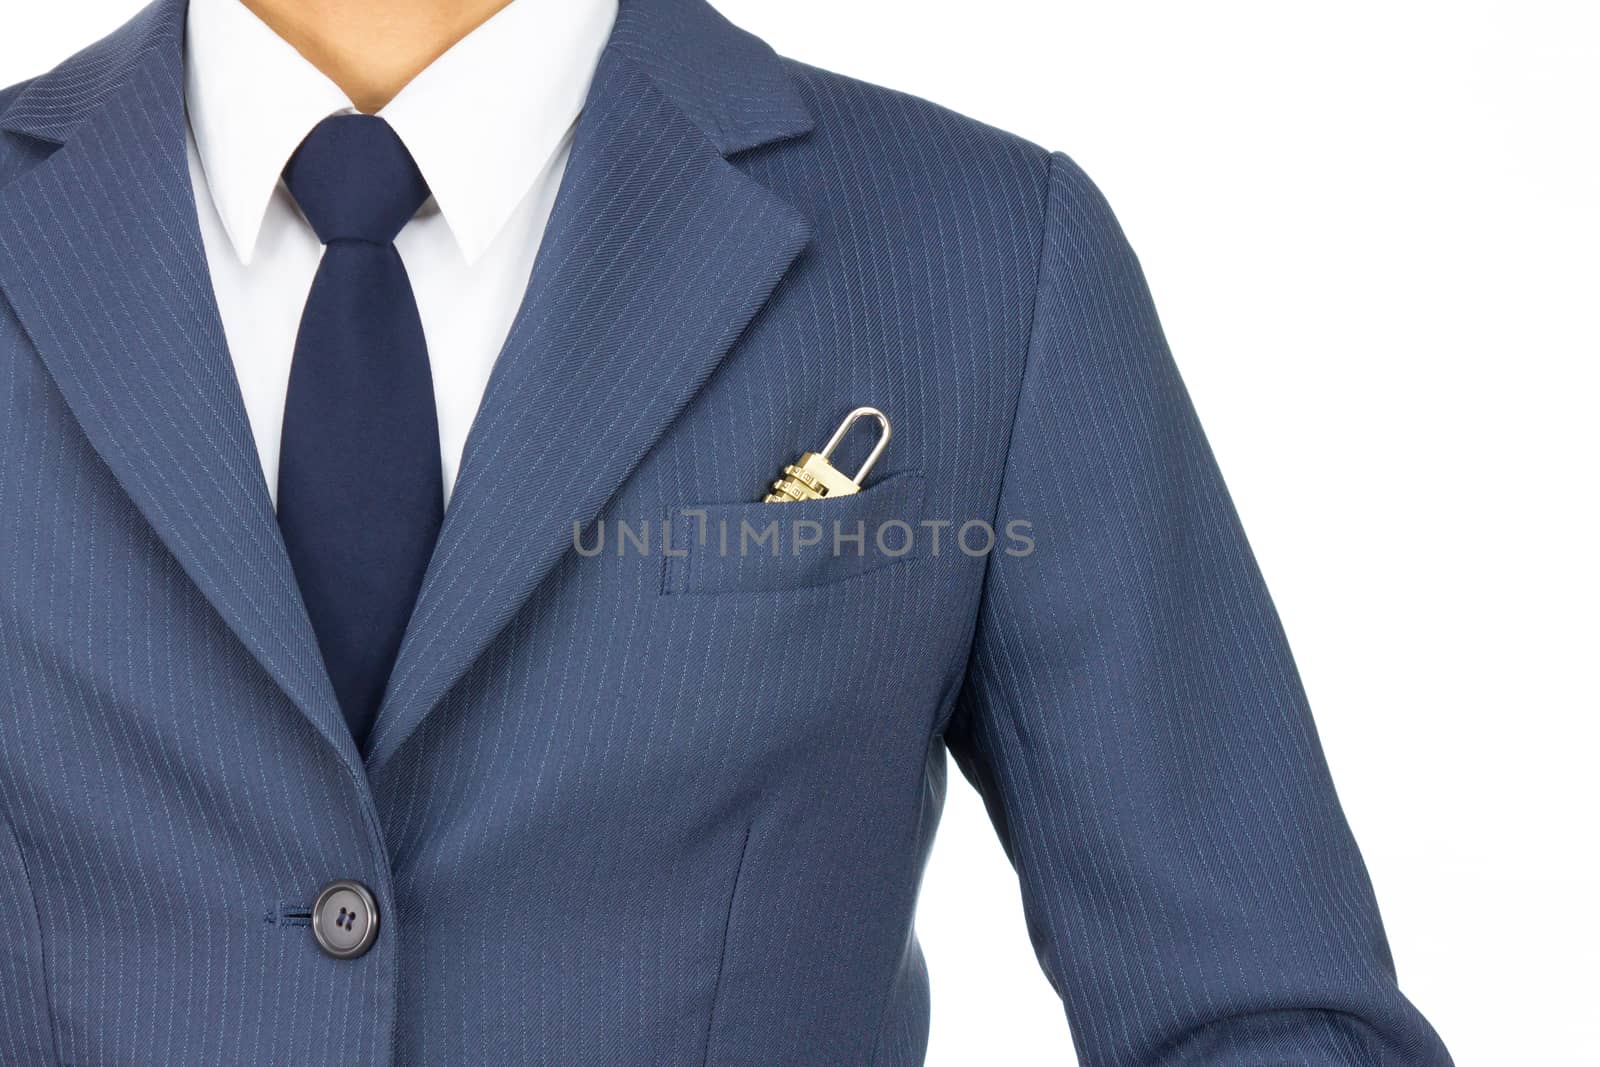 Businessman in Blue Suit With Combination Lock in Pocket Isolated on White Background. Concept about Security or Safety.